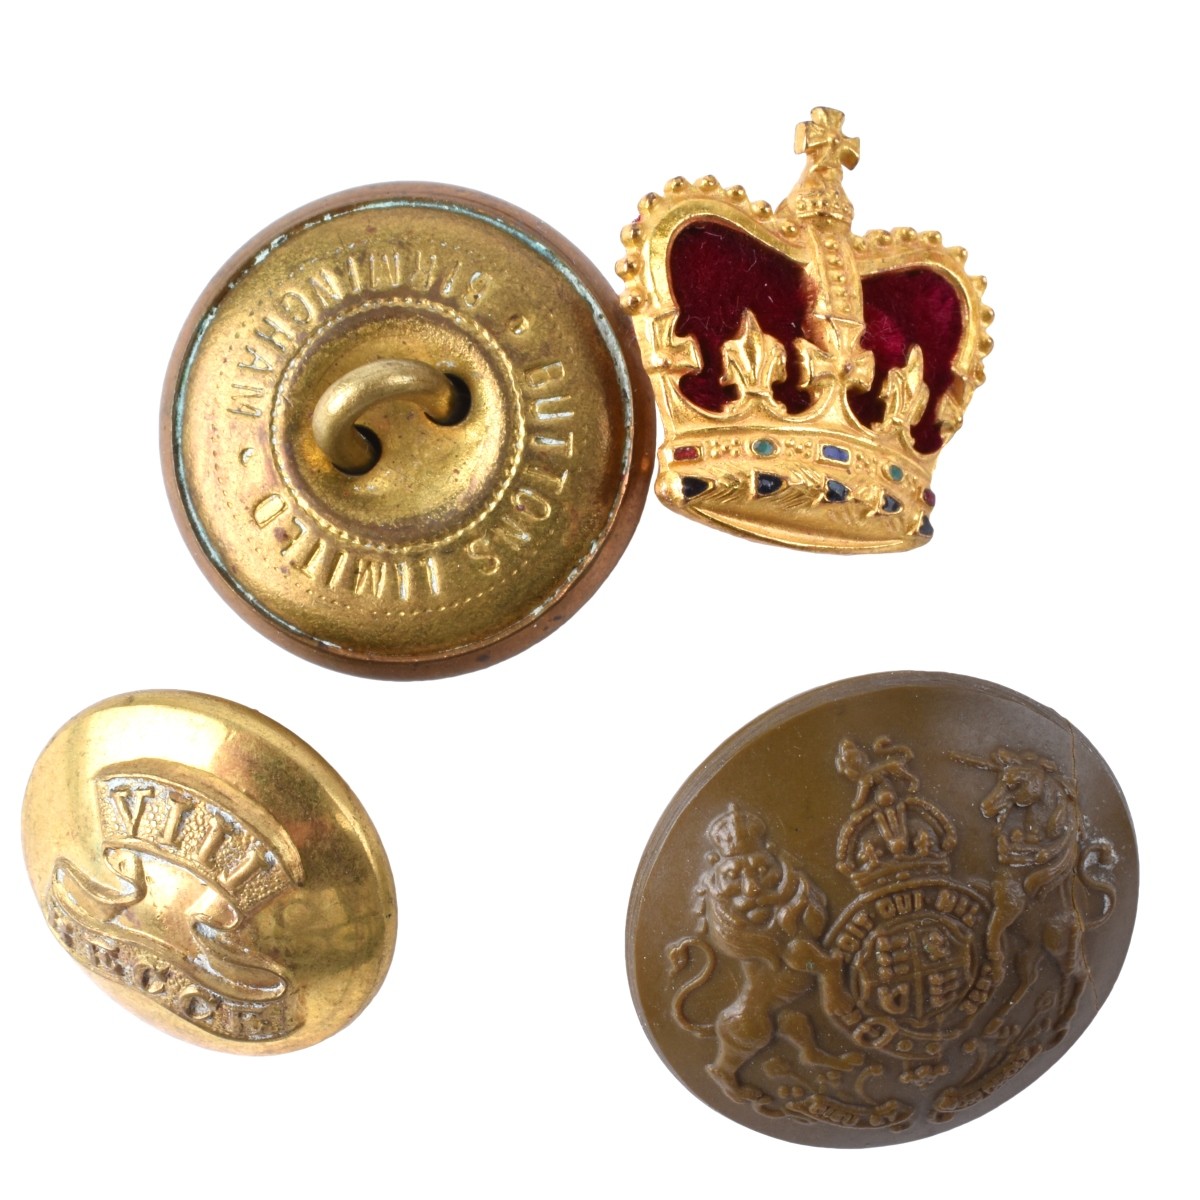 Old Military Buttons | Kodner Auctions